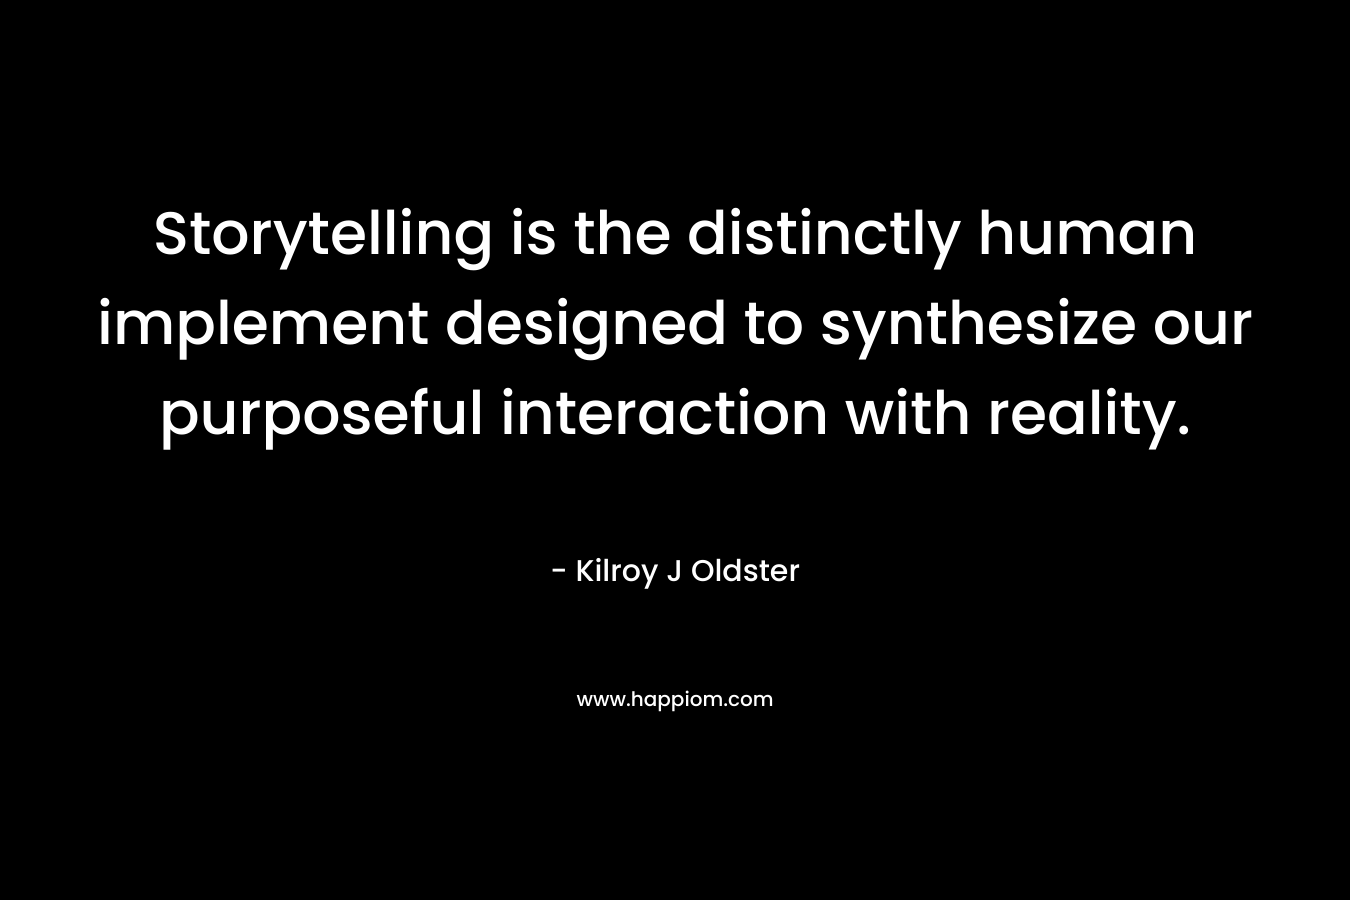 Storytelling is the distinctly human implement designed to synthesize our purposeful interaction with reality. – Kilroy J Oldster